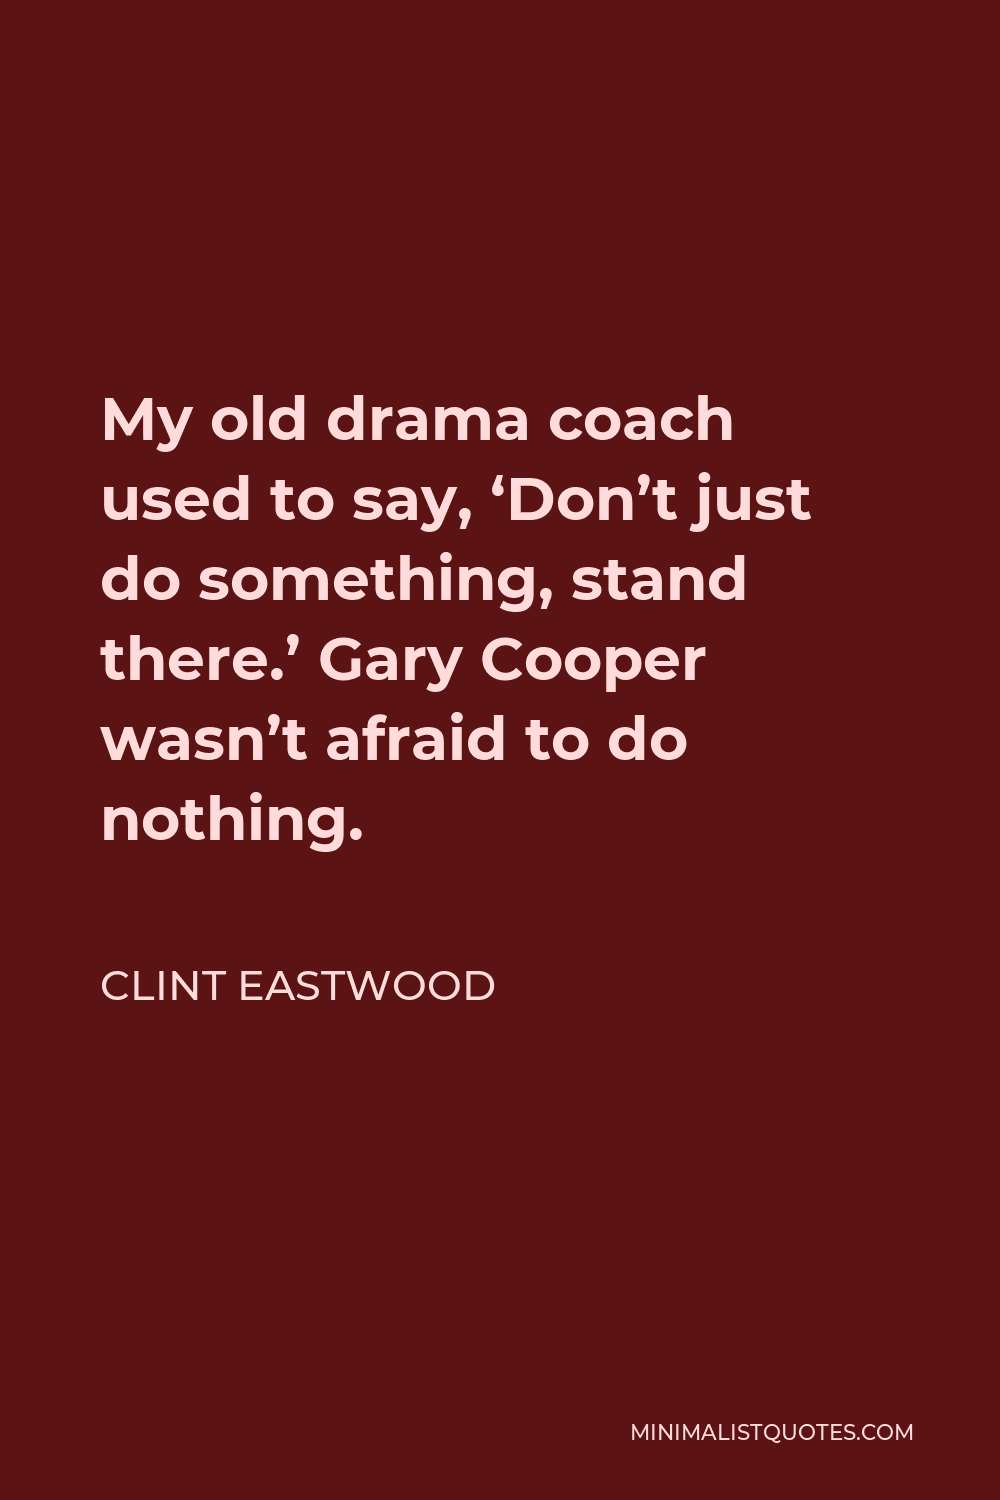 Clint Eastwood Quote: My old drama coach used to say, 'Don't just do  something, stand there.' Gary Cooper wasn't afraid to do nothing.